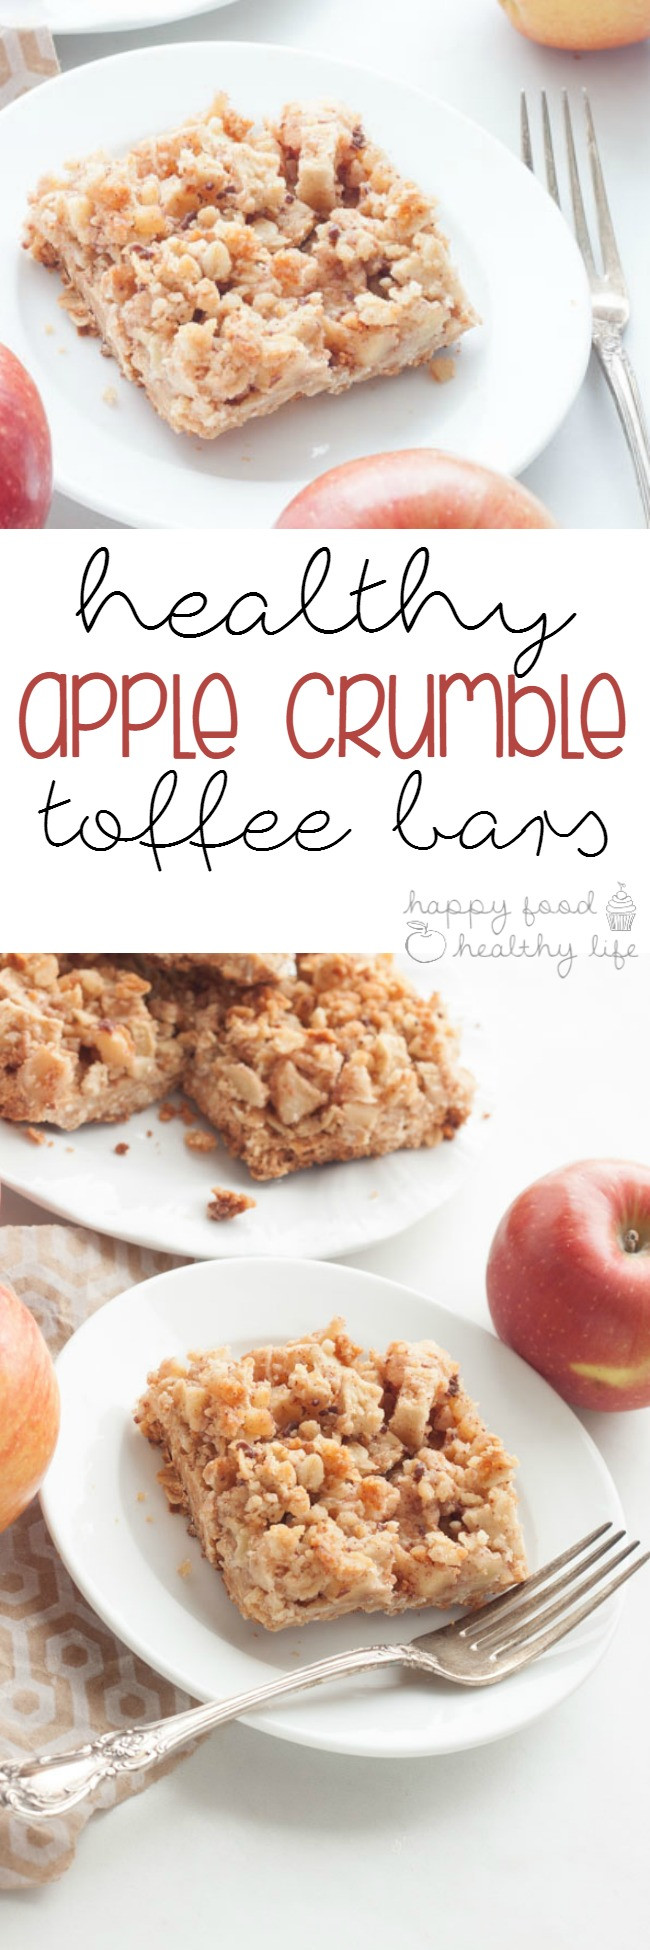 Healthy Fast Food Desserts
 Healthy Apple Crumble Breakfast Bars They’re healthy